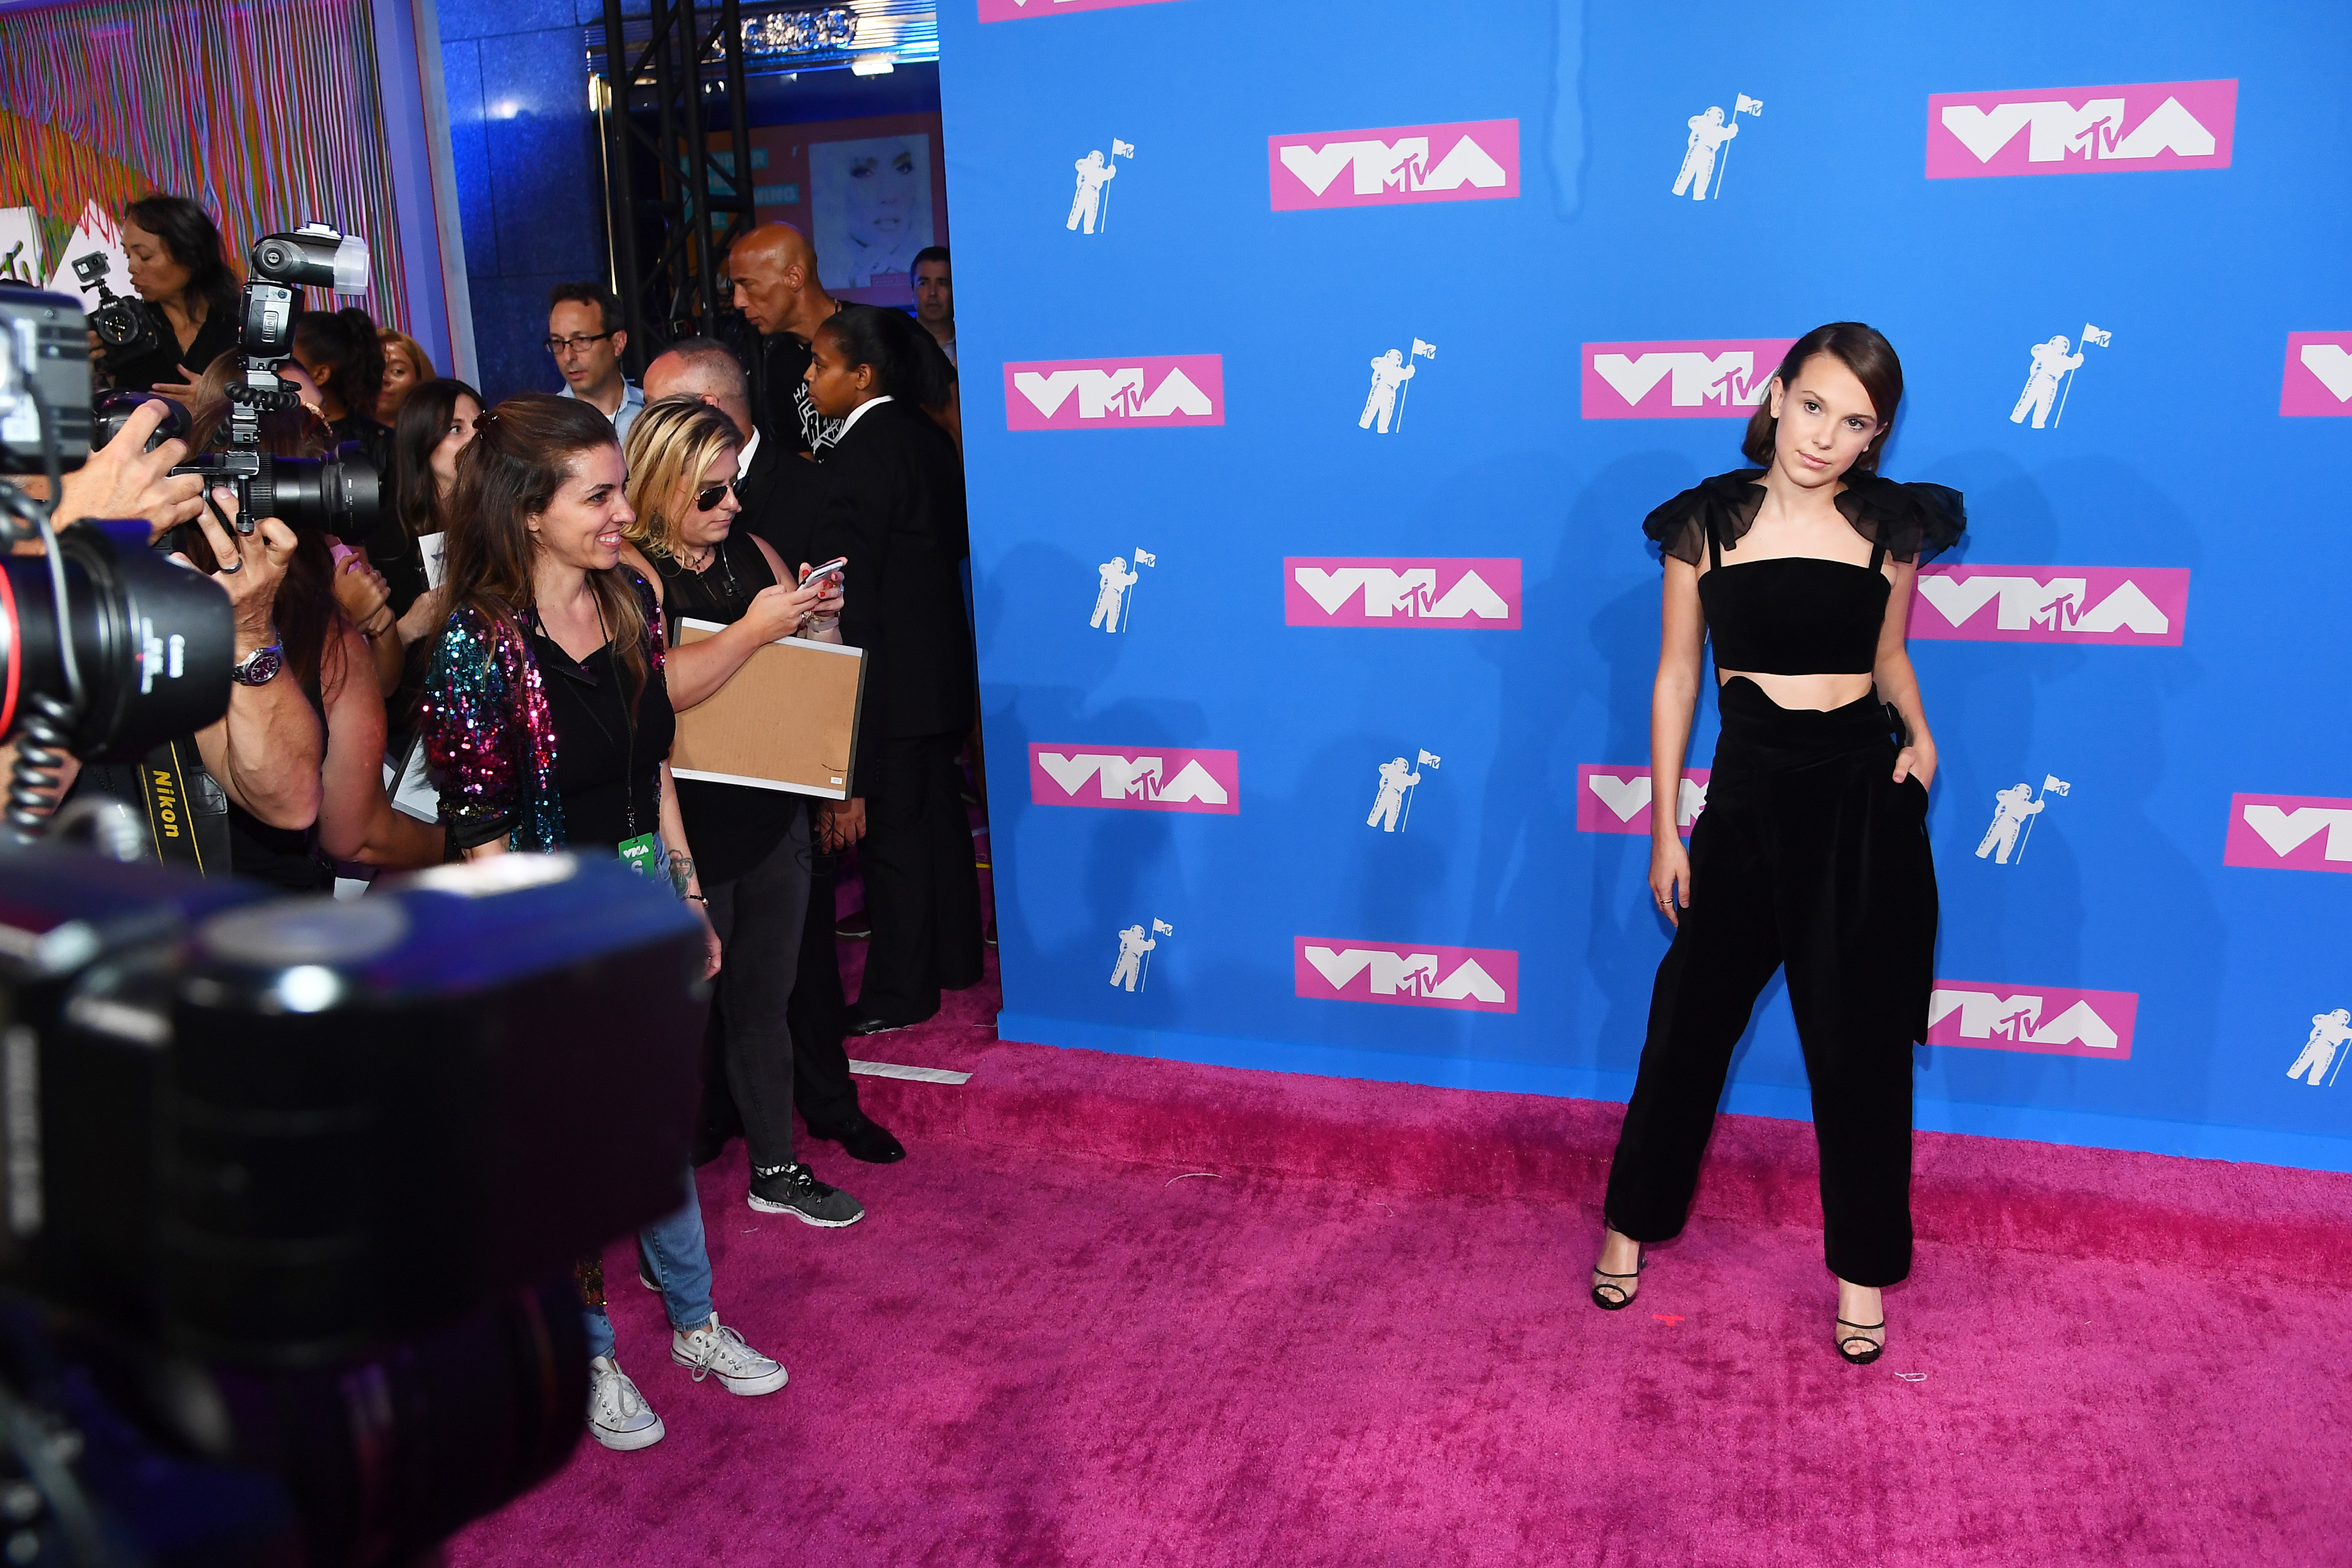 The Best & Most Head-Scratching Looks On MTV VMAs Red Carpet